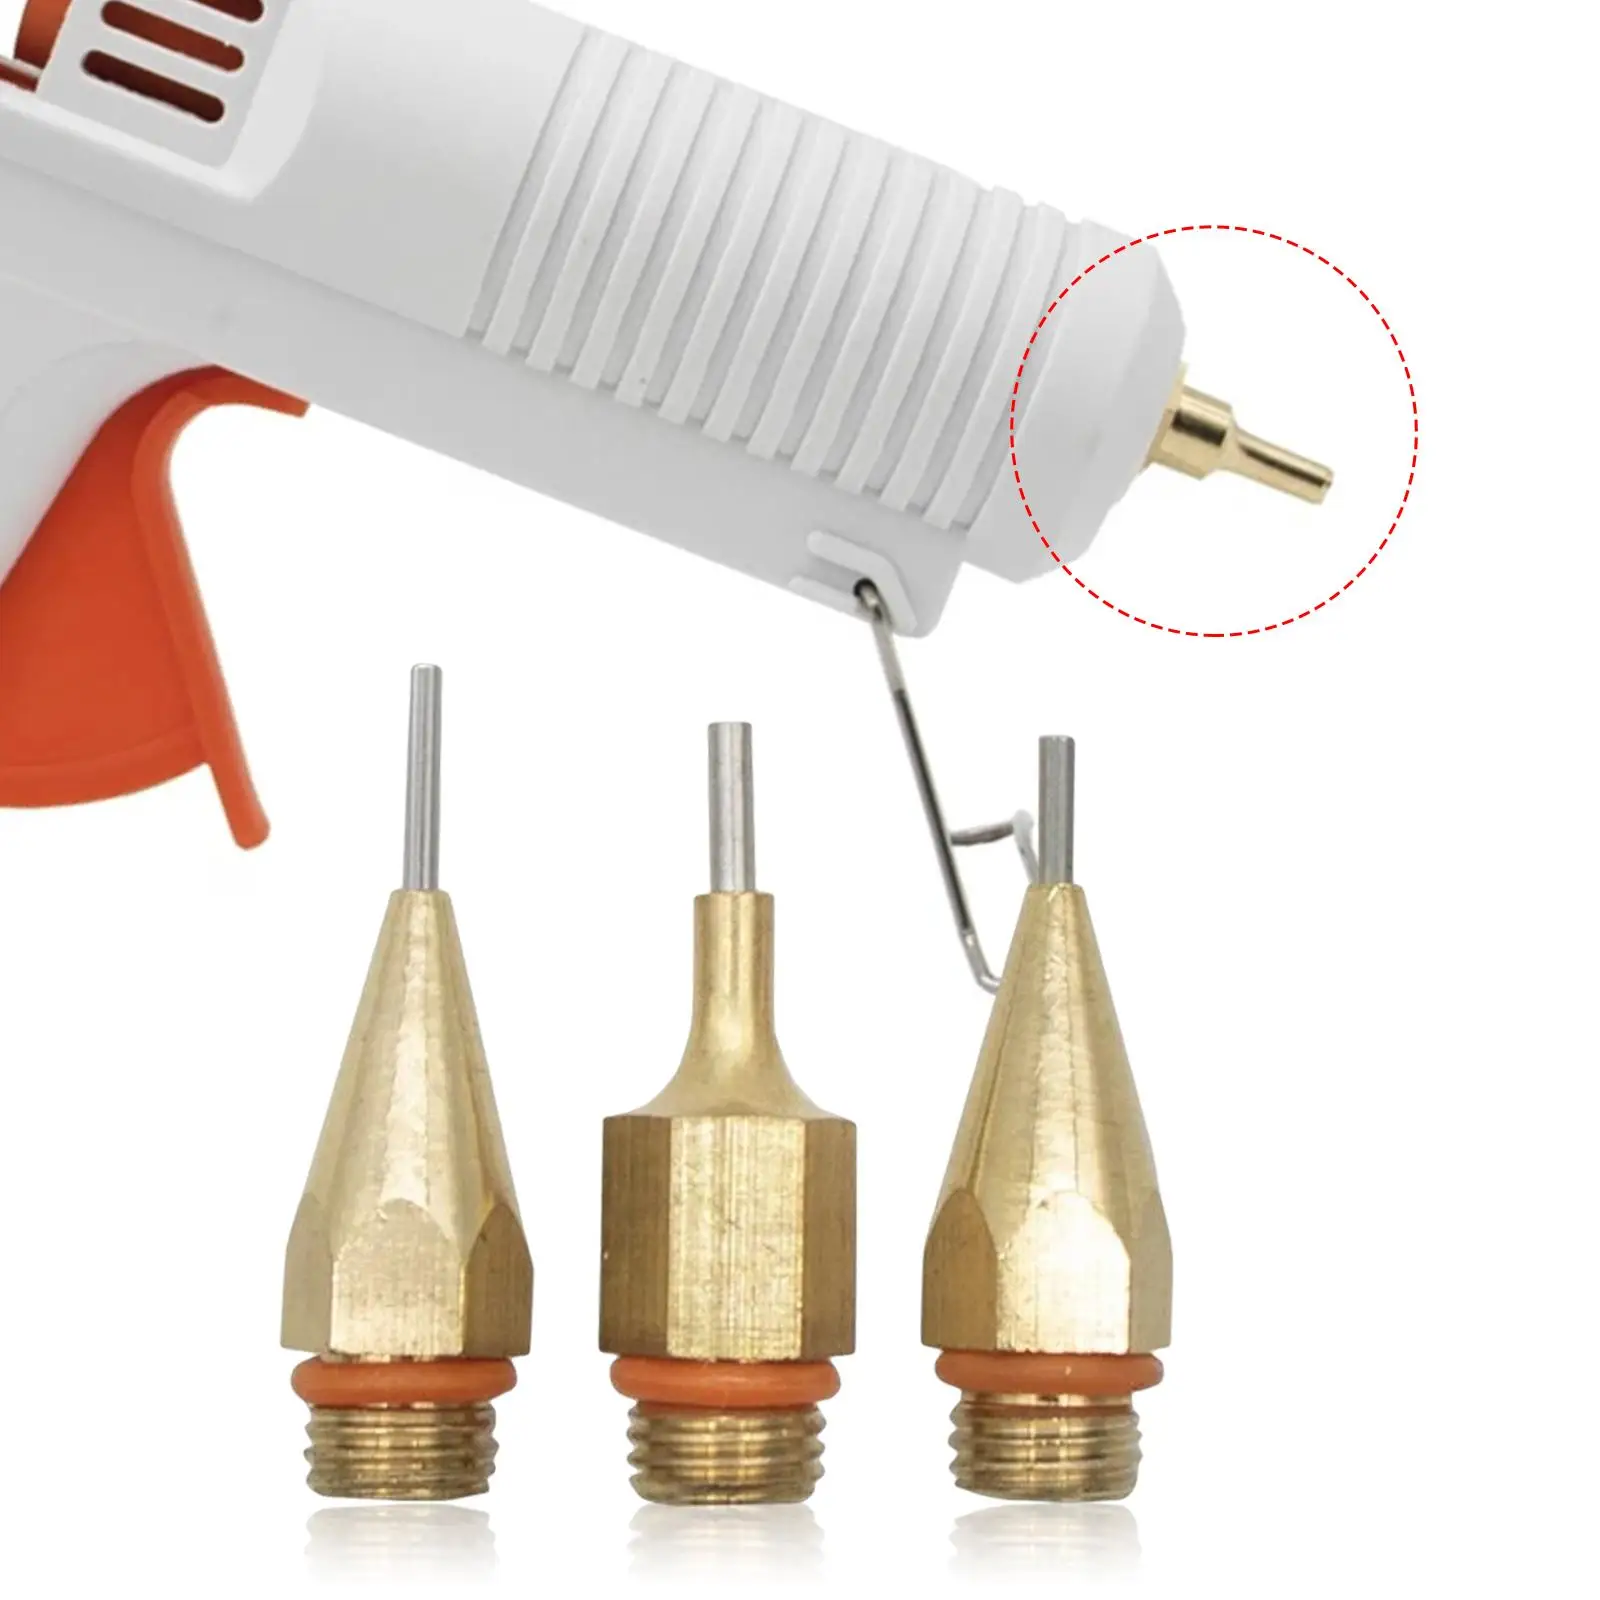 3 Pieces Nozzle for Hot Glue Tool Replacement Parts Fine Nozzle for Glue Tool